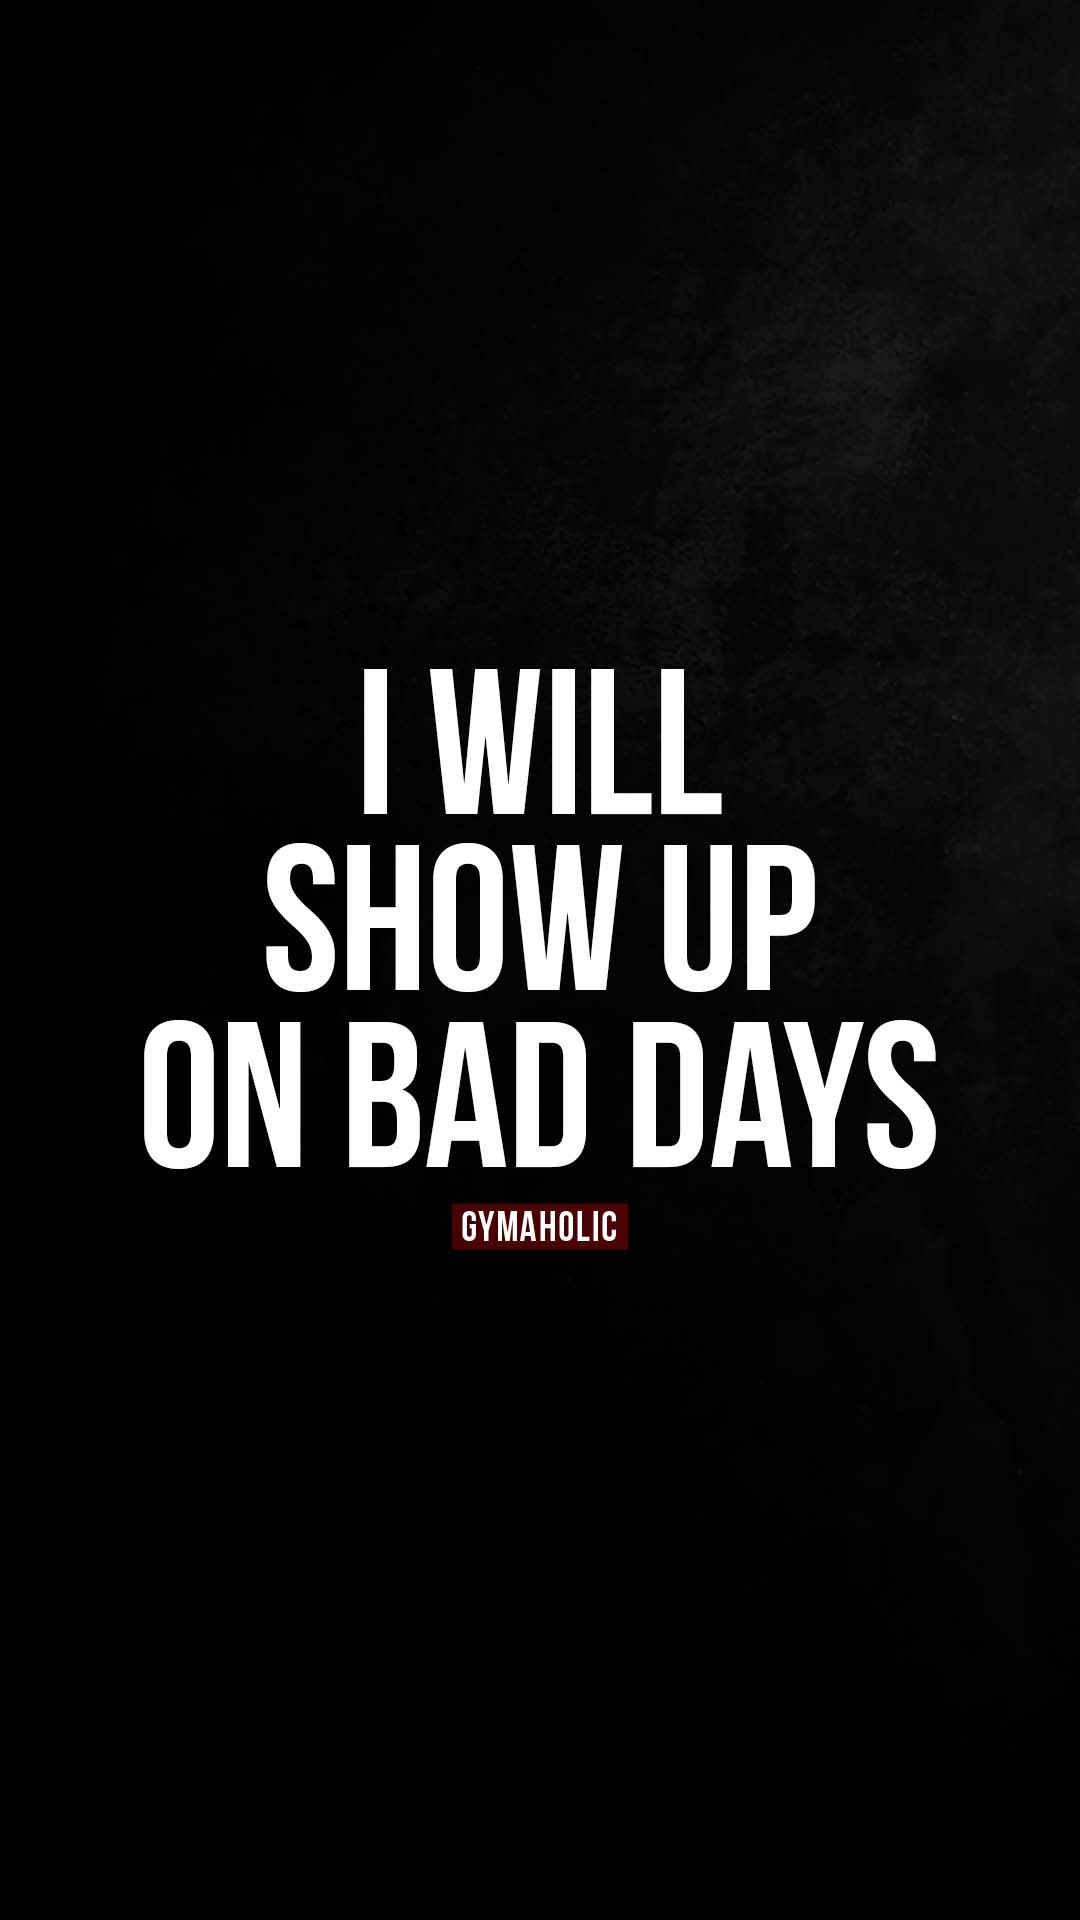 I will show up on bad days